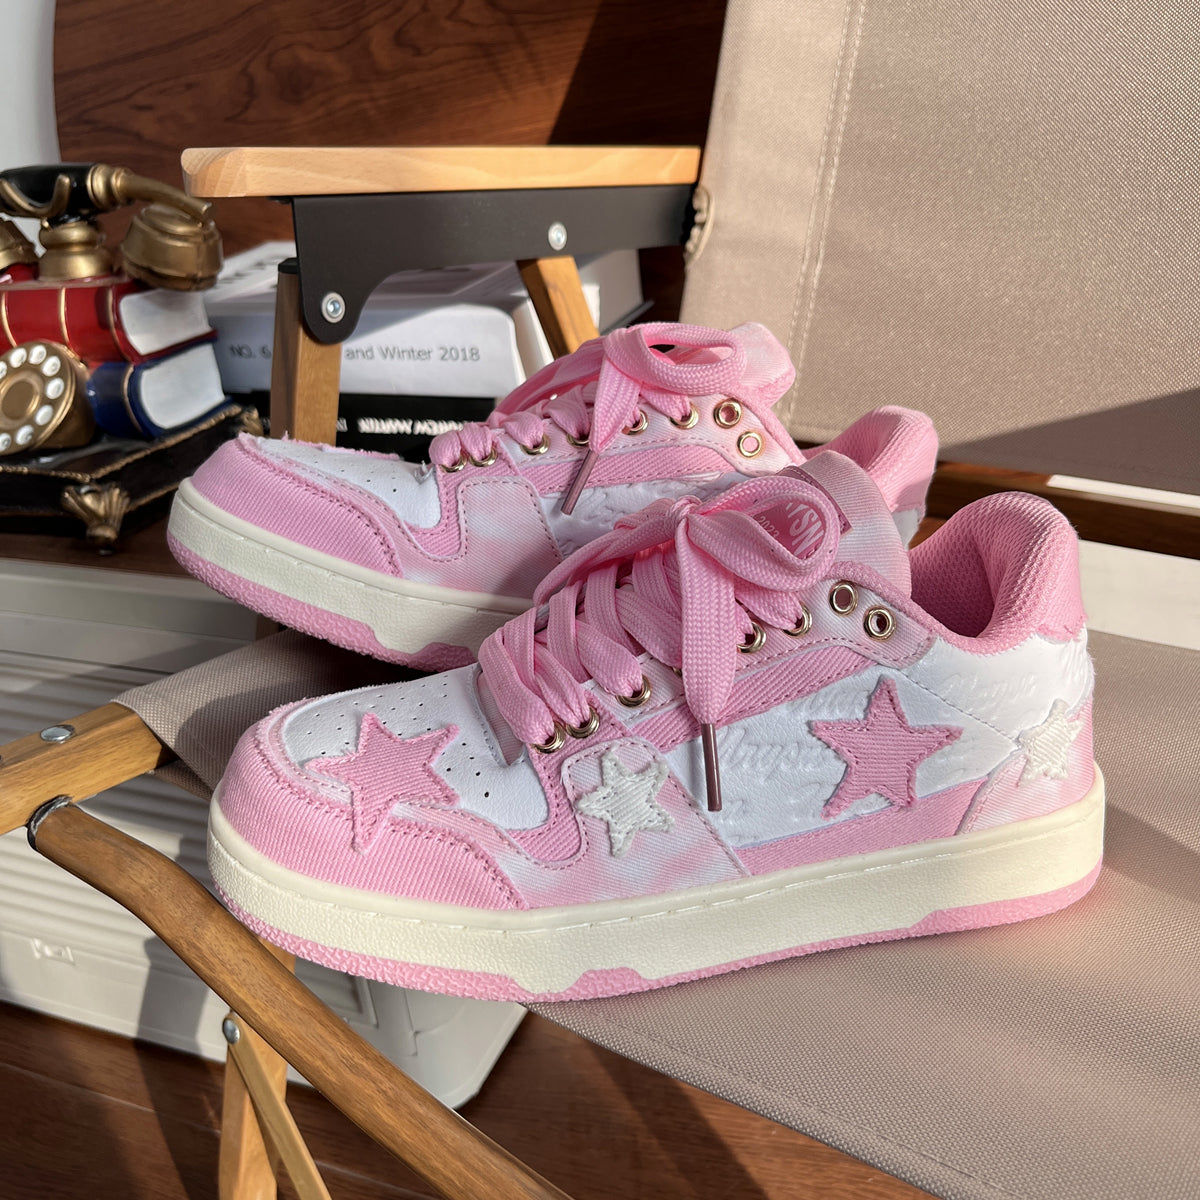 Women Sweet Cute White Pink  Star Sneakers Sports Running Shoes